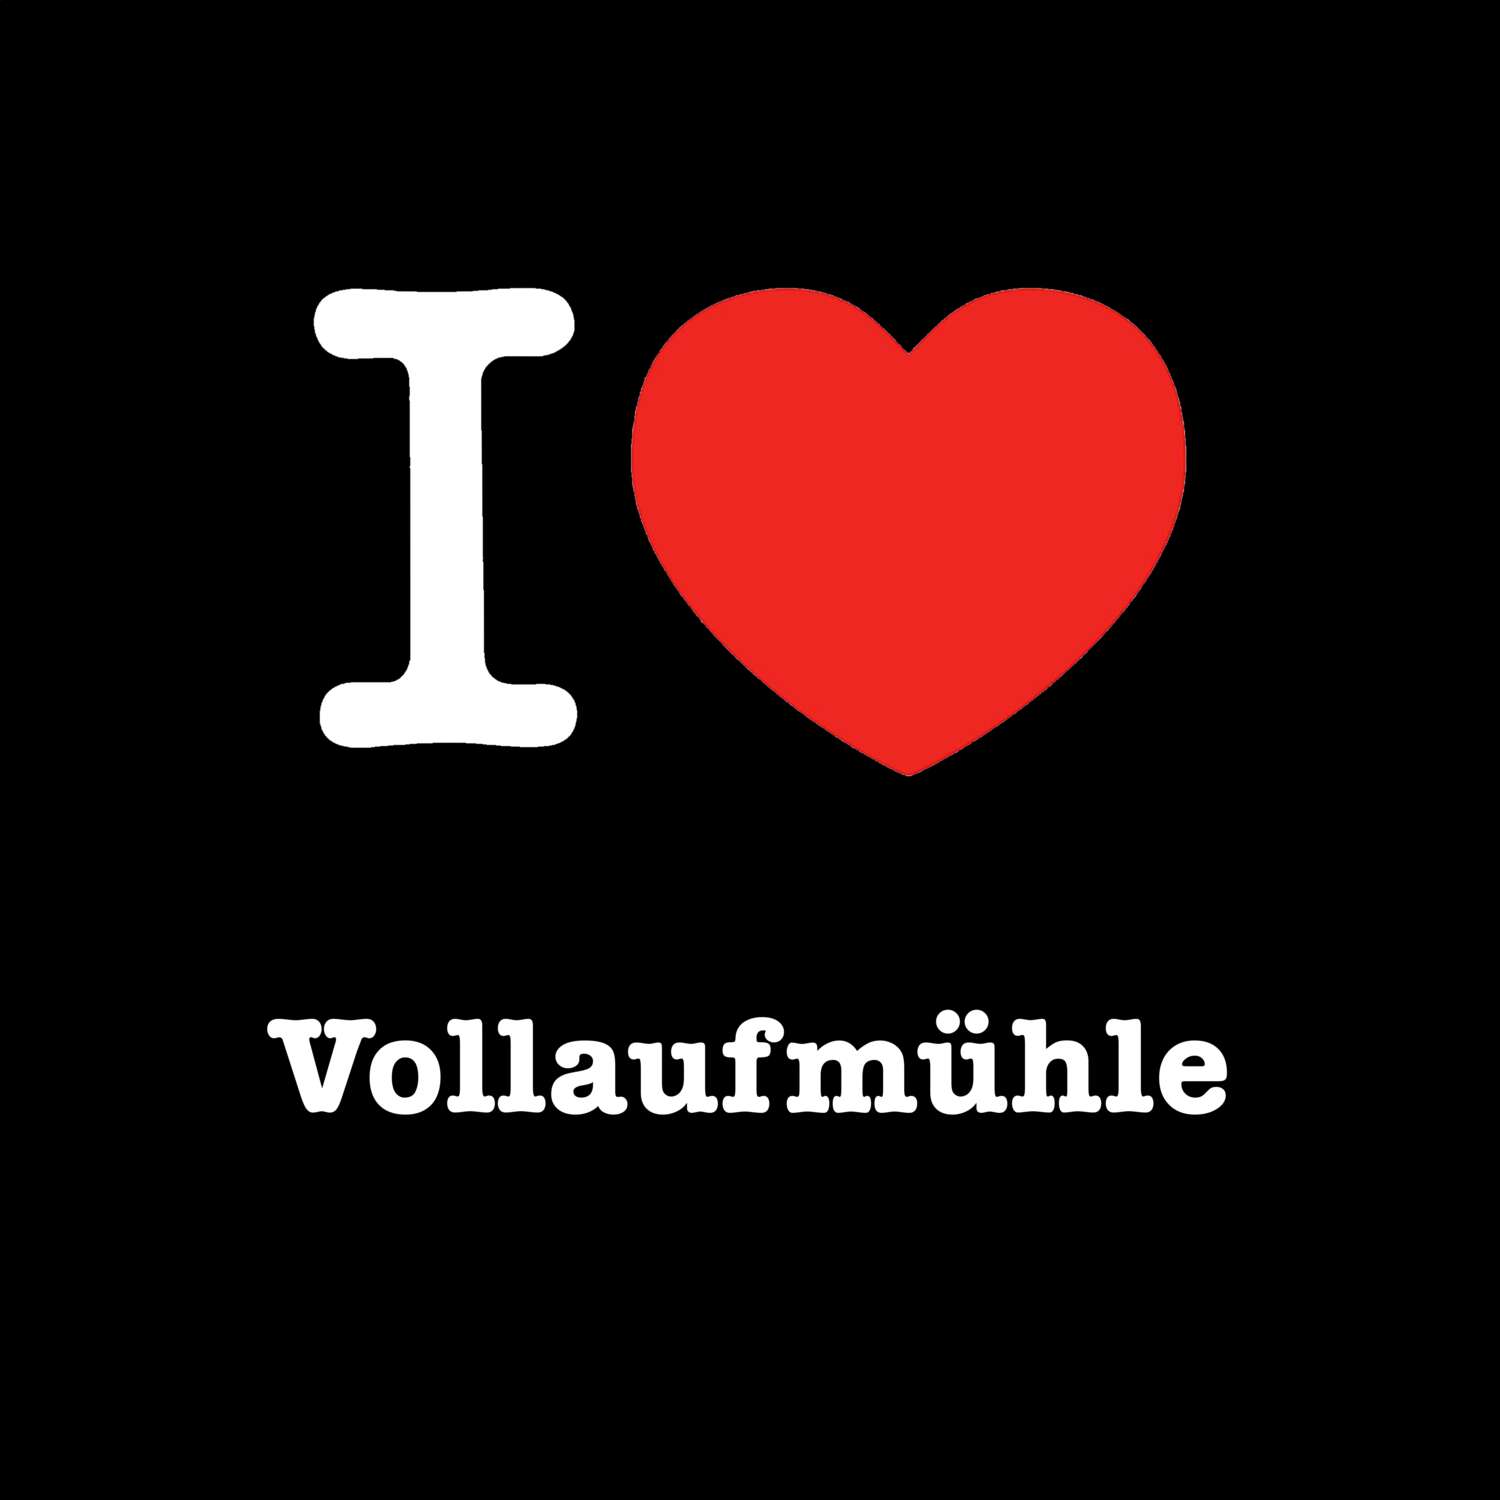 Vollaufmühle T-Shirt »I love«